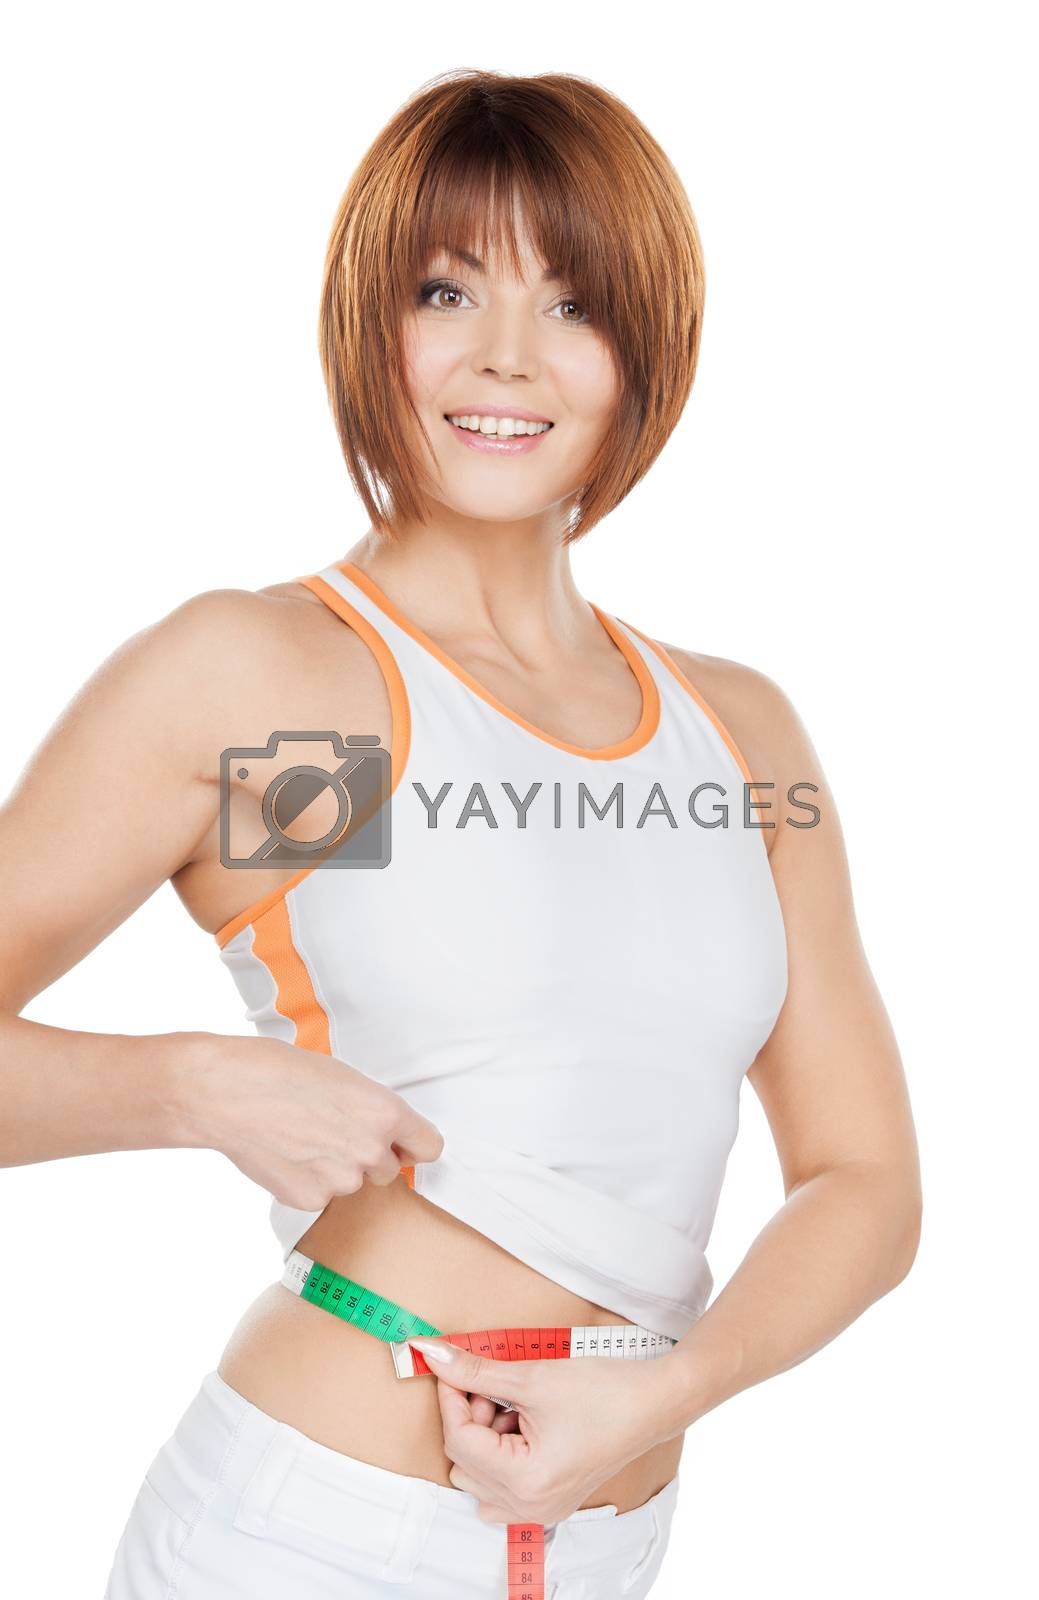 Royalty free image of woman measuring her waist by dolgachov